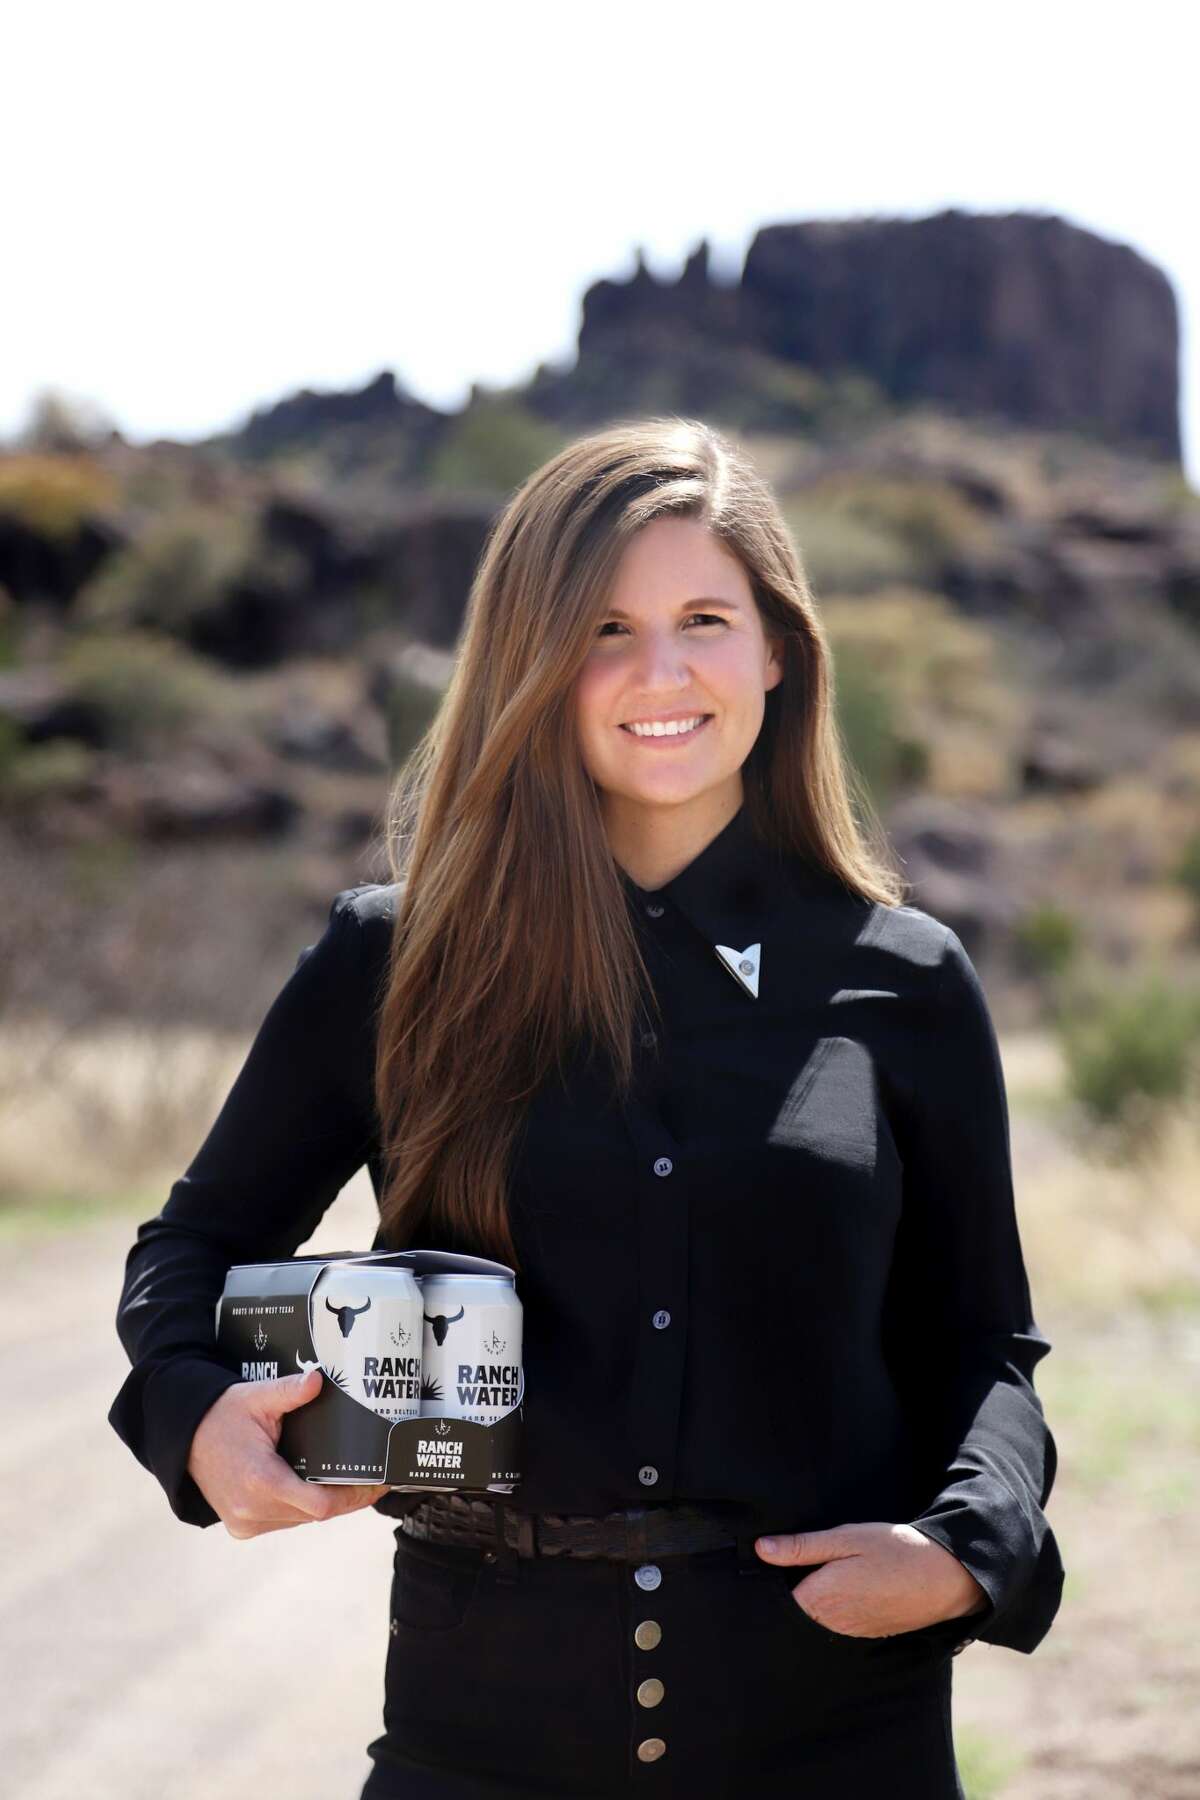 Lone River Ranch Water founder and CEO Katie Beal Brown.